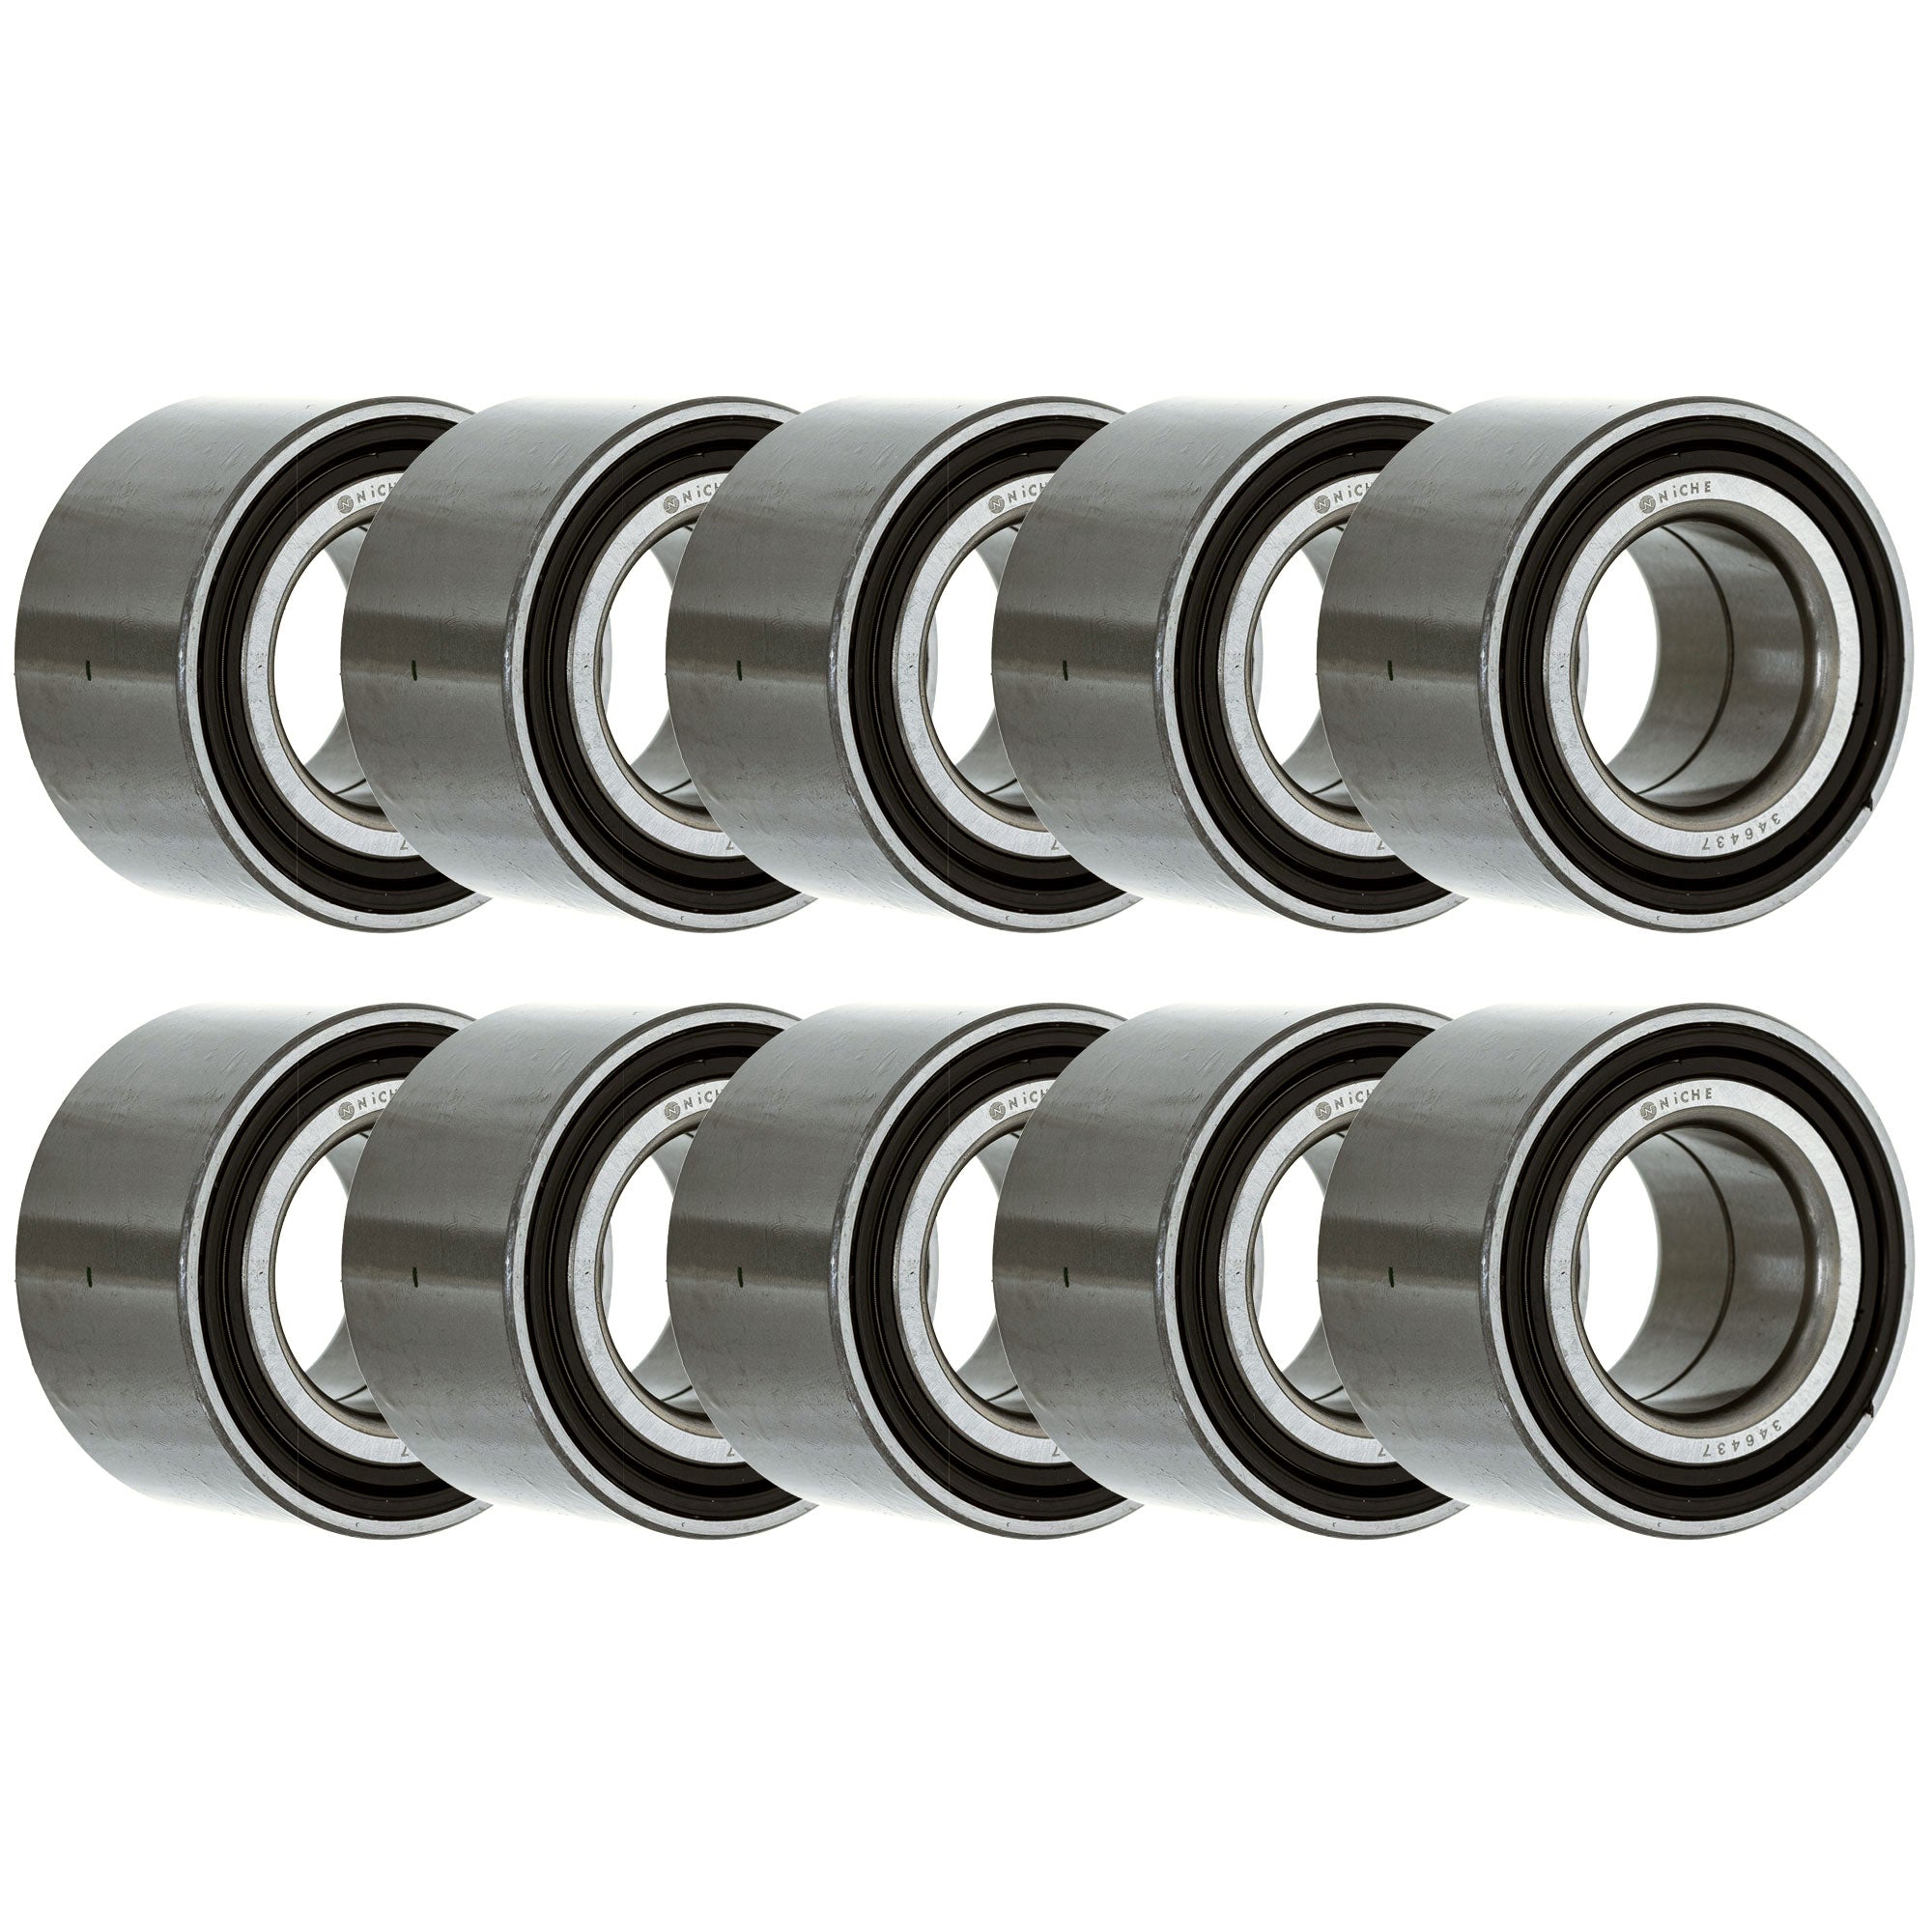 Double Row, Angular Contact, Ball Bearing Pack of 10 10-Pack for zOTHER Pioneer Big NICHE 519-CBB2200R